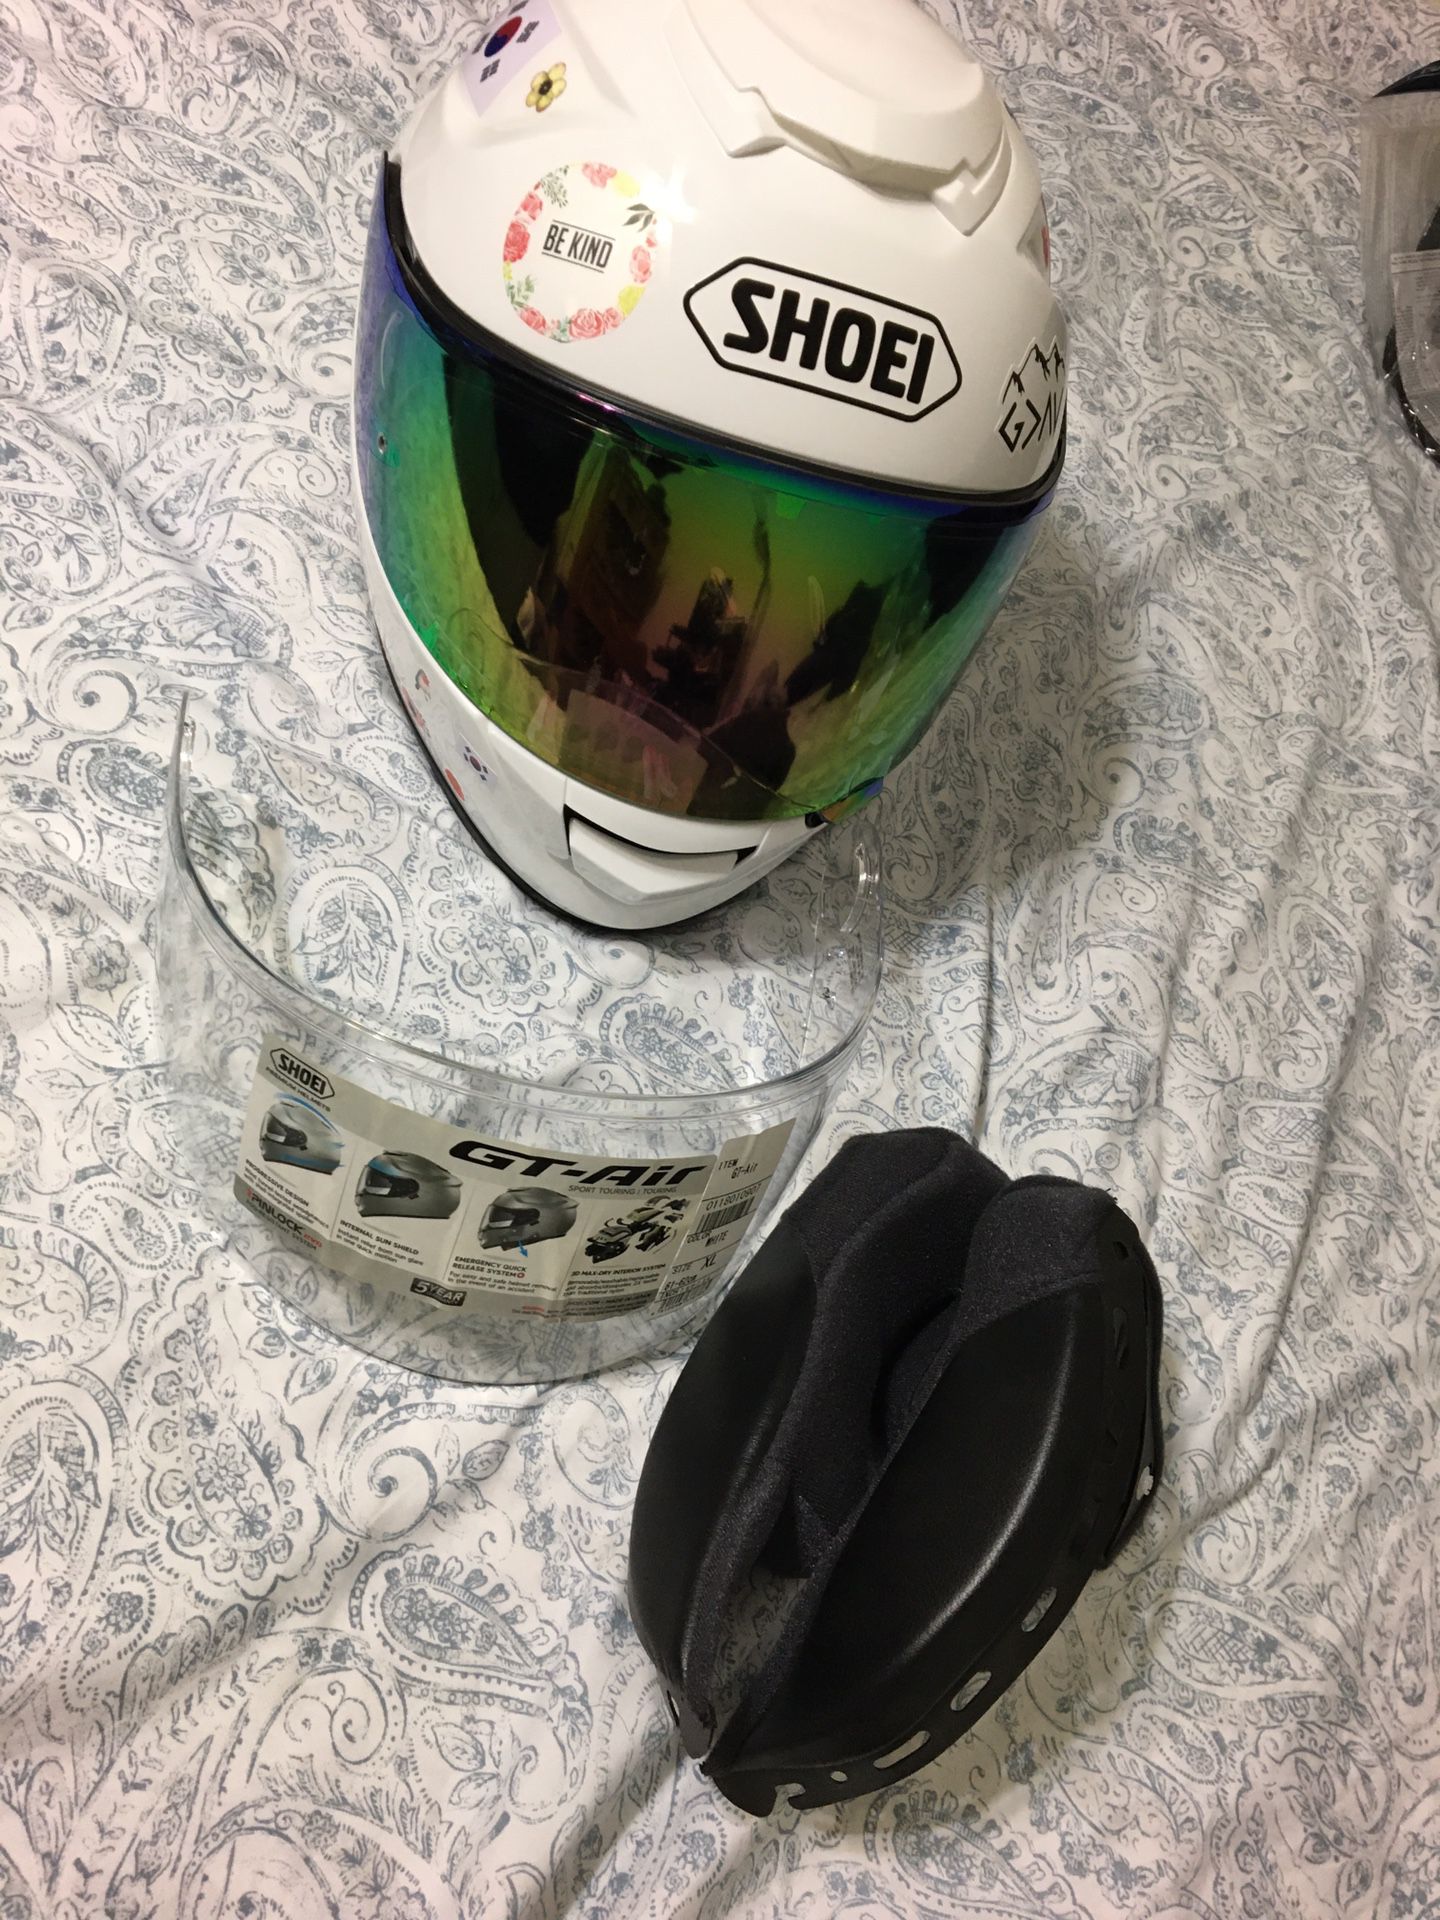 Shoei GT-Air Motorcycle Helmet, XL, Brand New With 2 Shields and Extra Cheek Pad